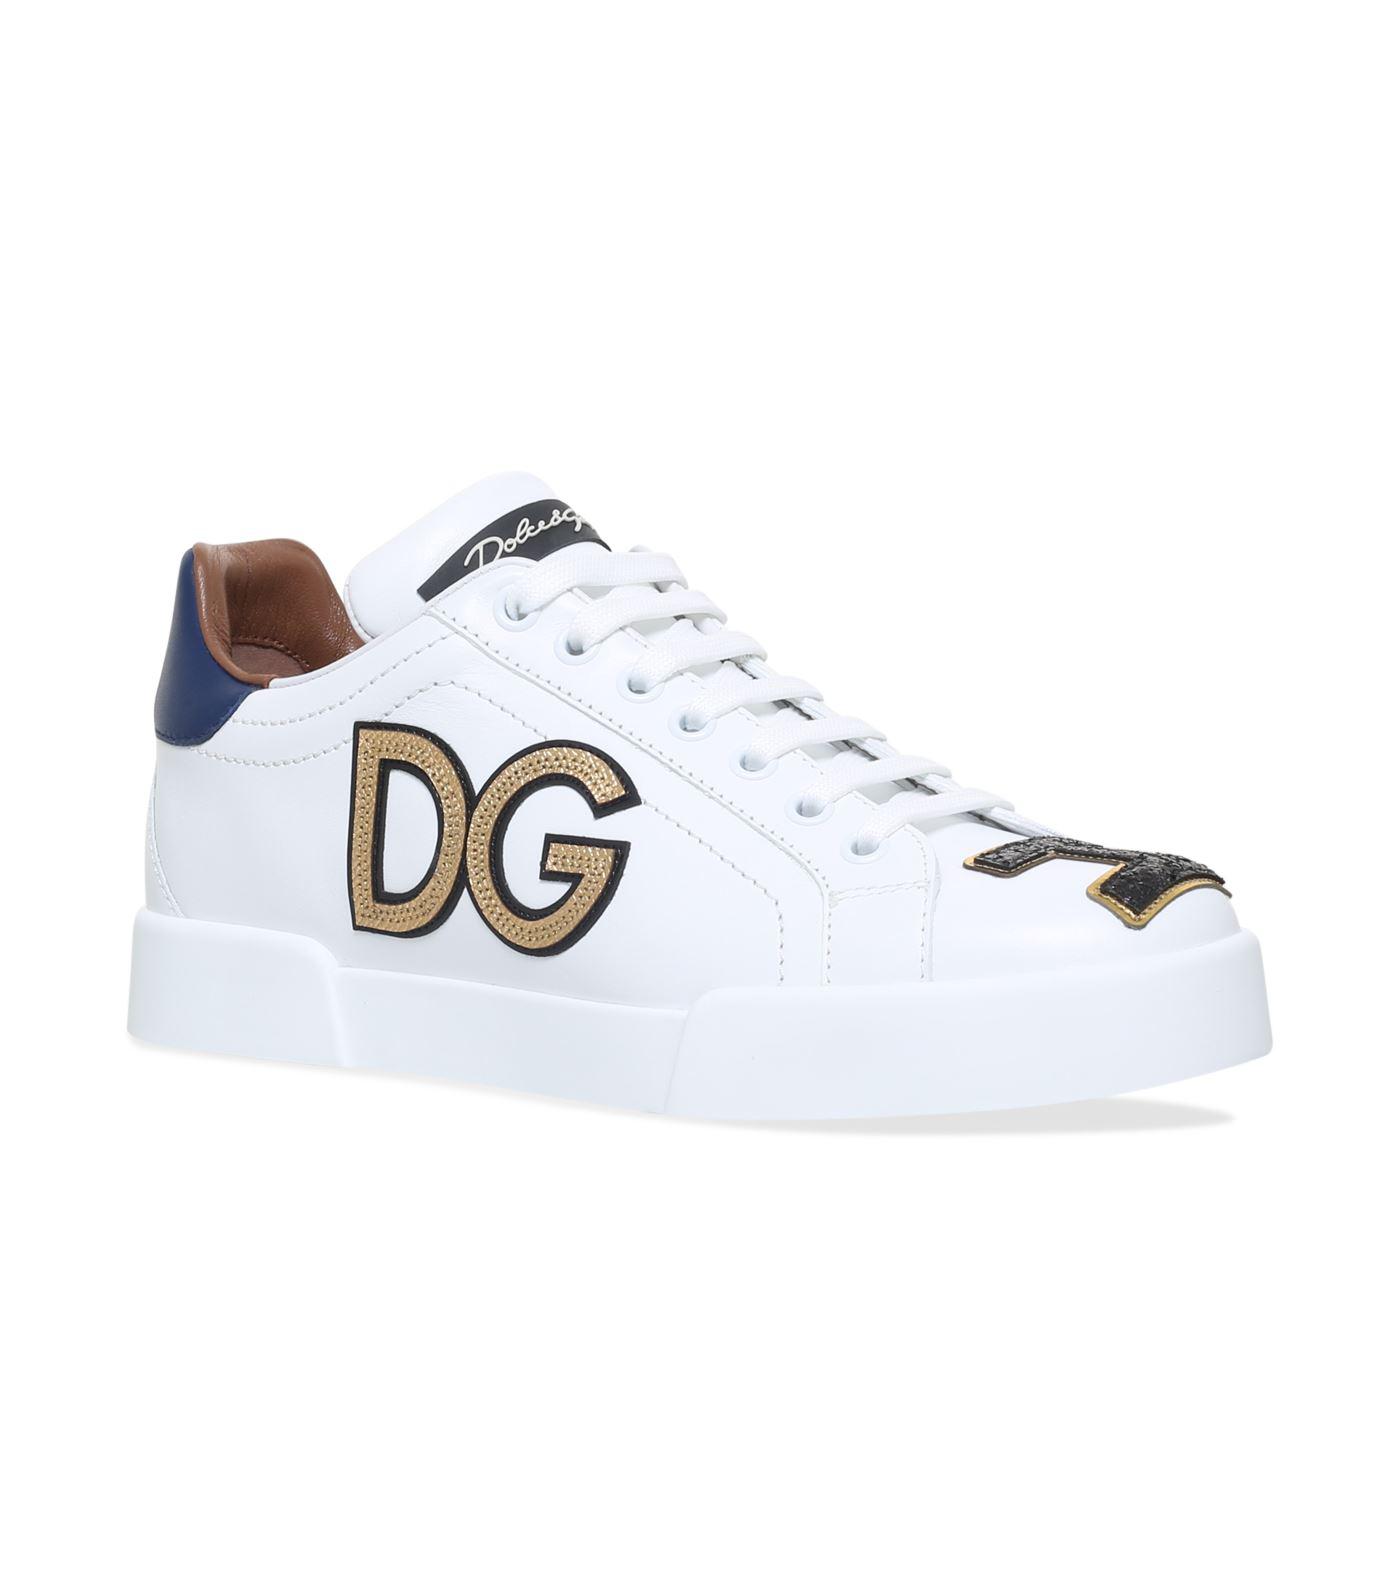 Dolce & Gabbana Leather Classic Crown Sneakers in White - Lyst